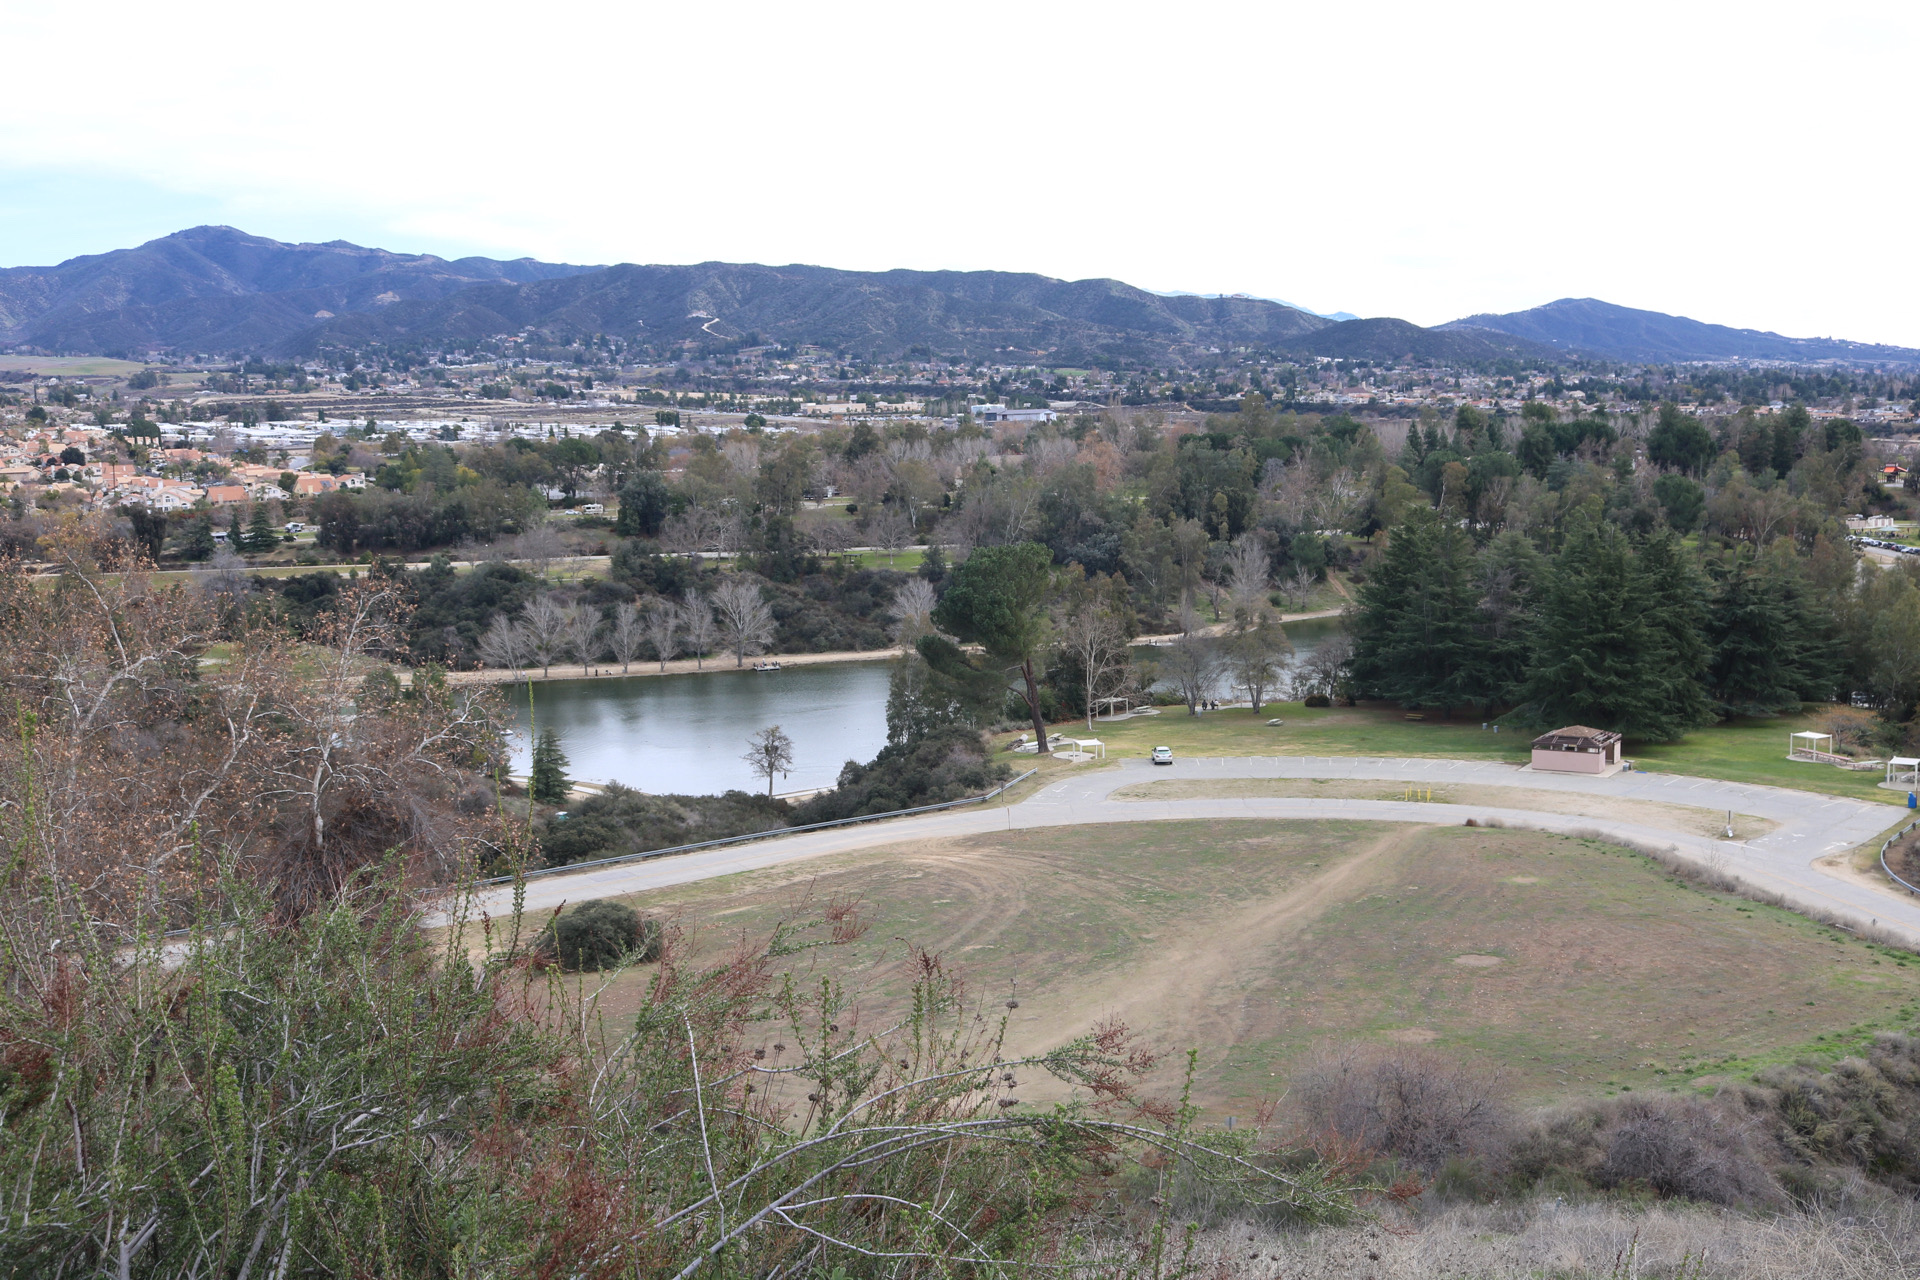 Yucaipa Landscape from the top of a hill over looking lake